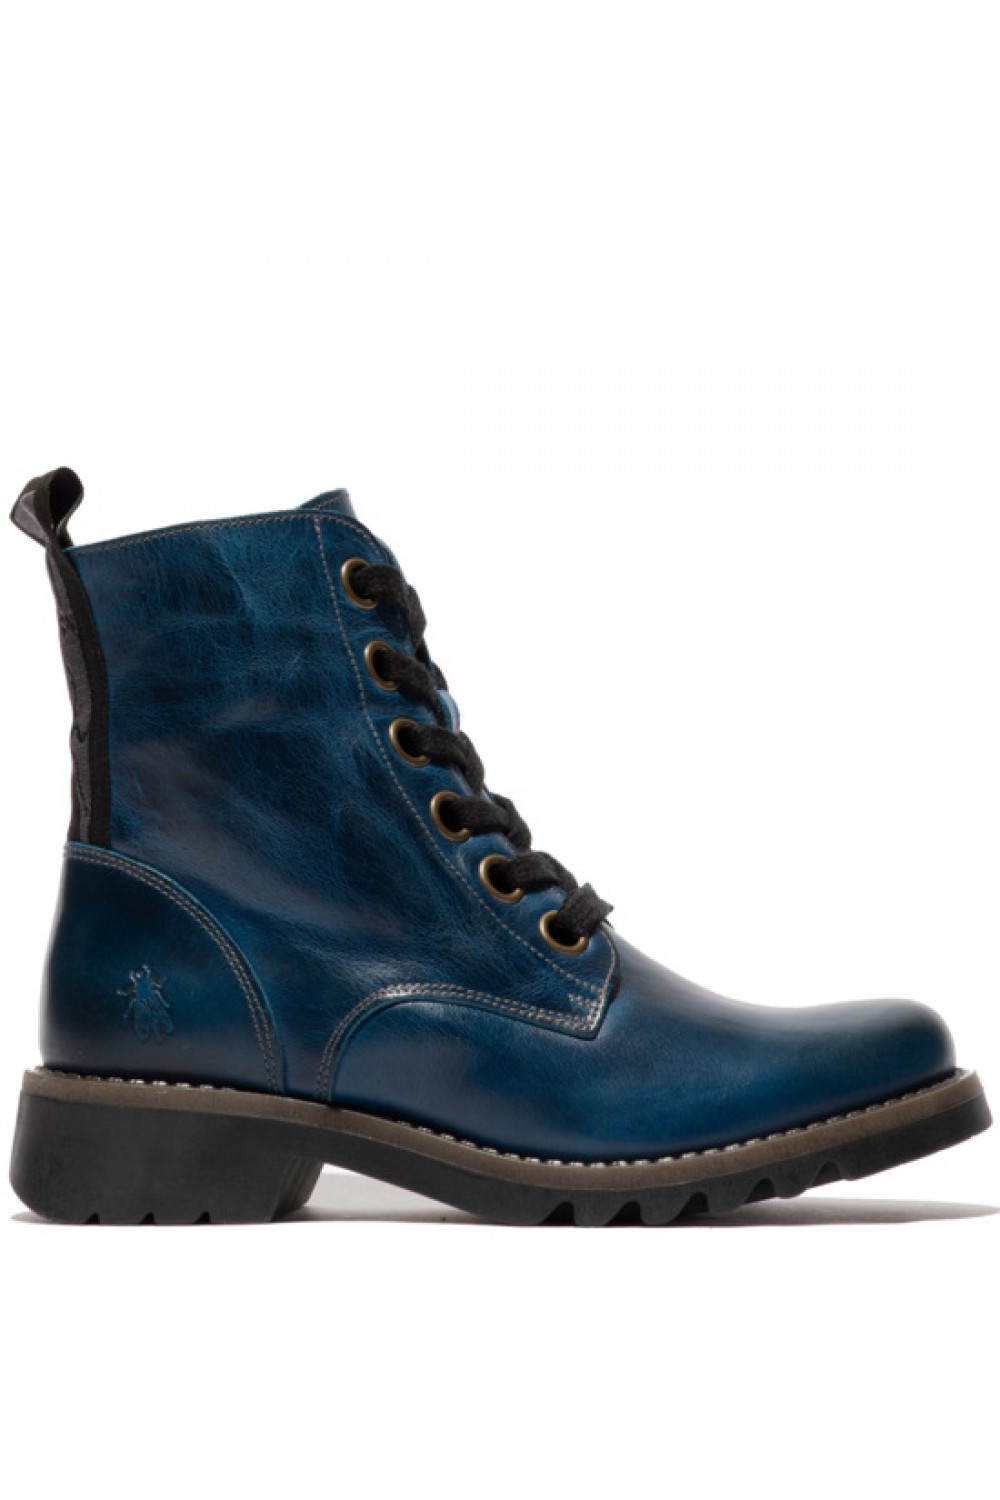 FLY LONDON Ragi539 Military Style Lace Up Boot Royal Blue